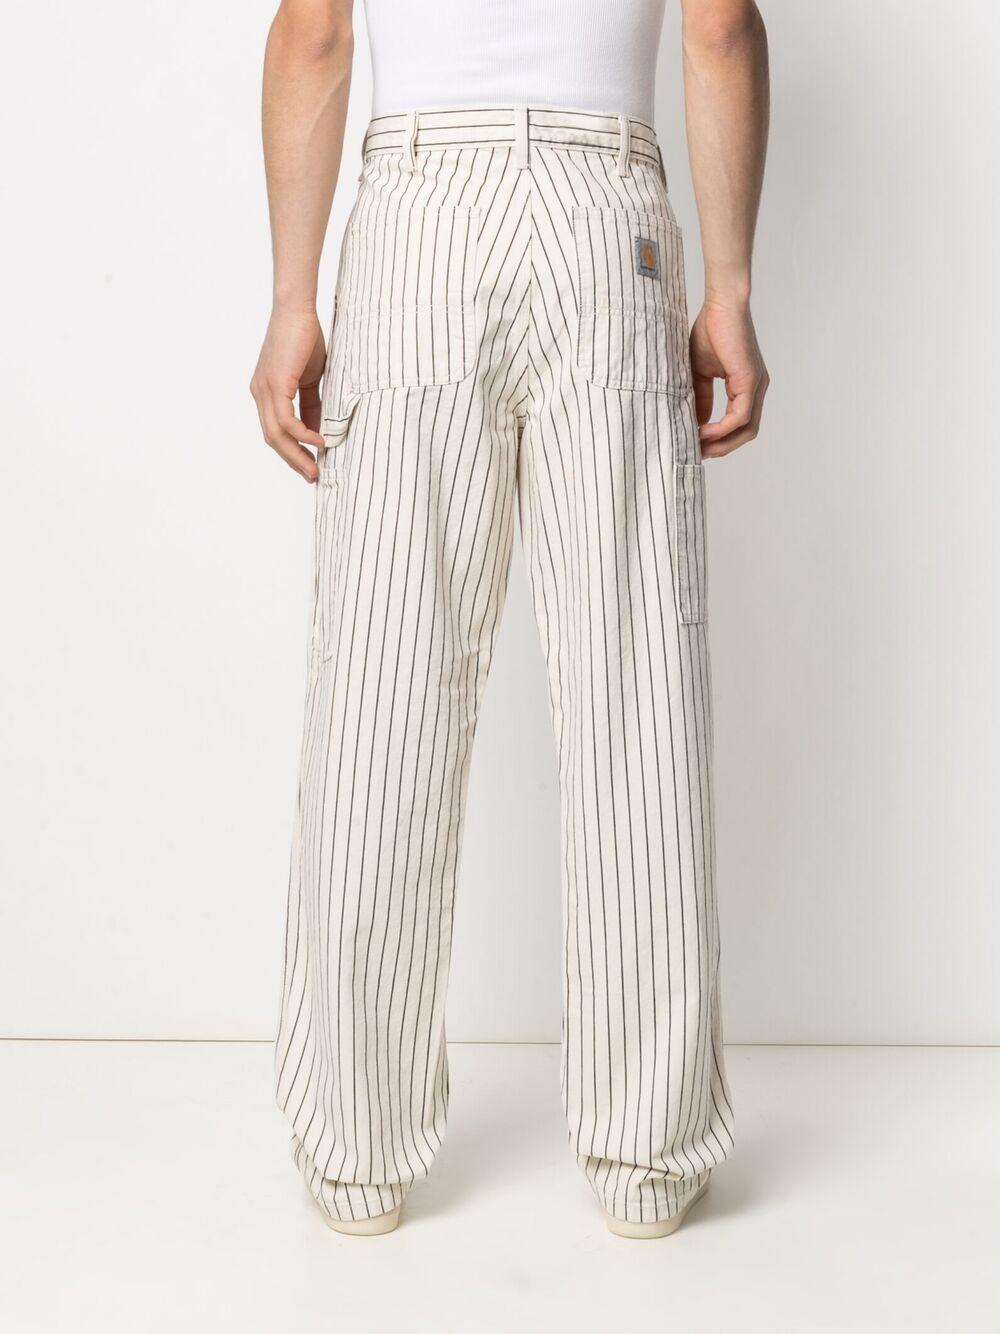 Carhartt WIP Traded Striped Straight-leg Trousers in White for Men | Lyst